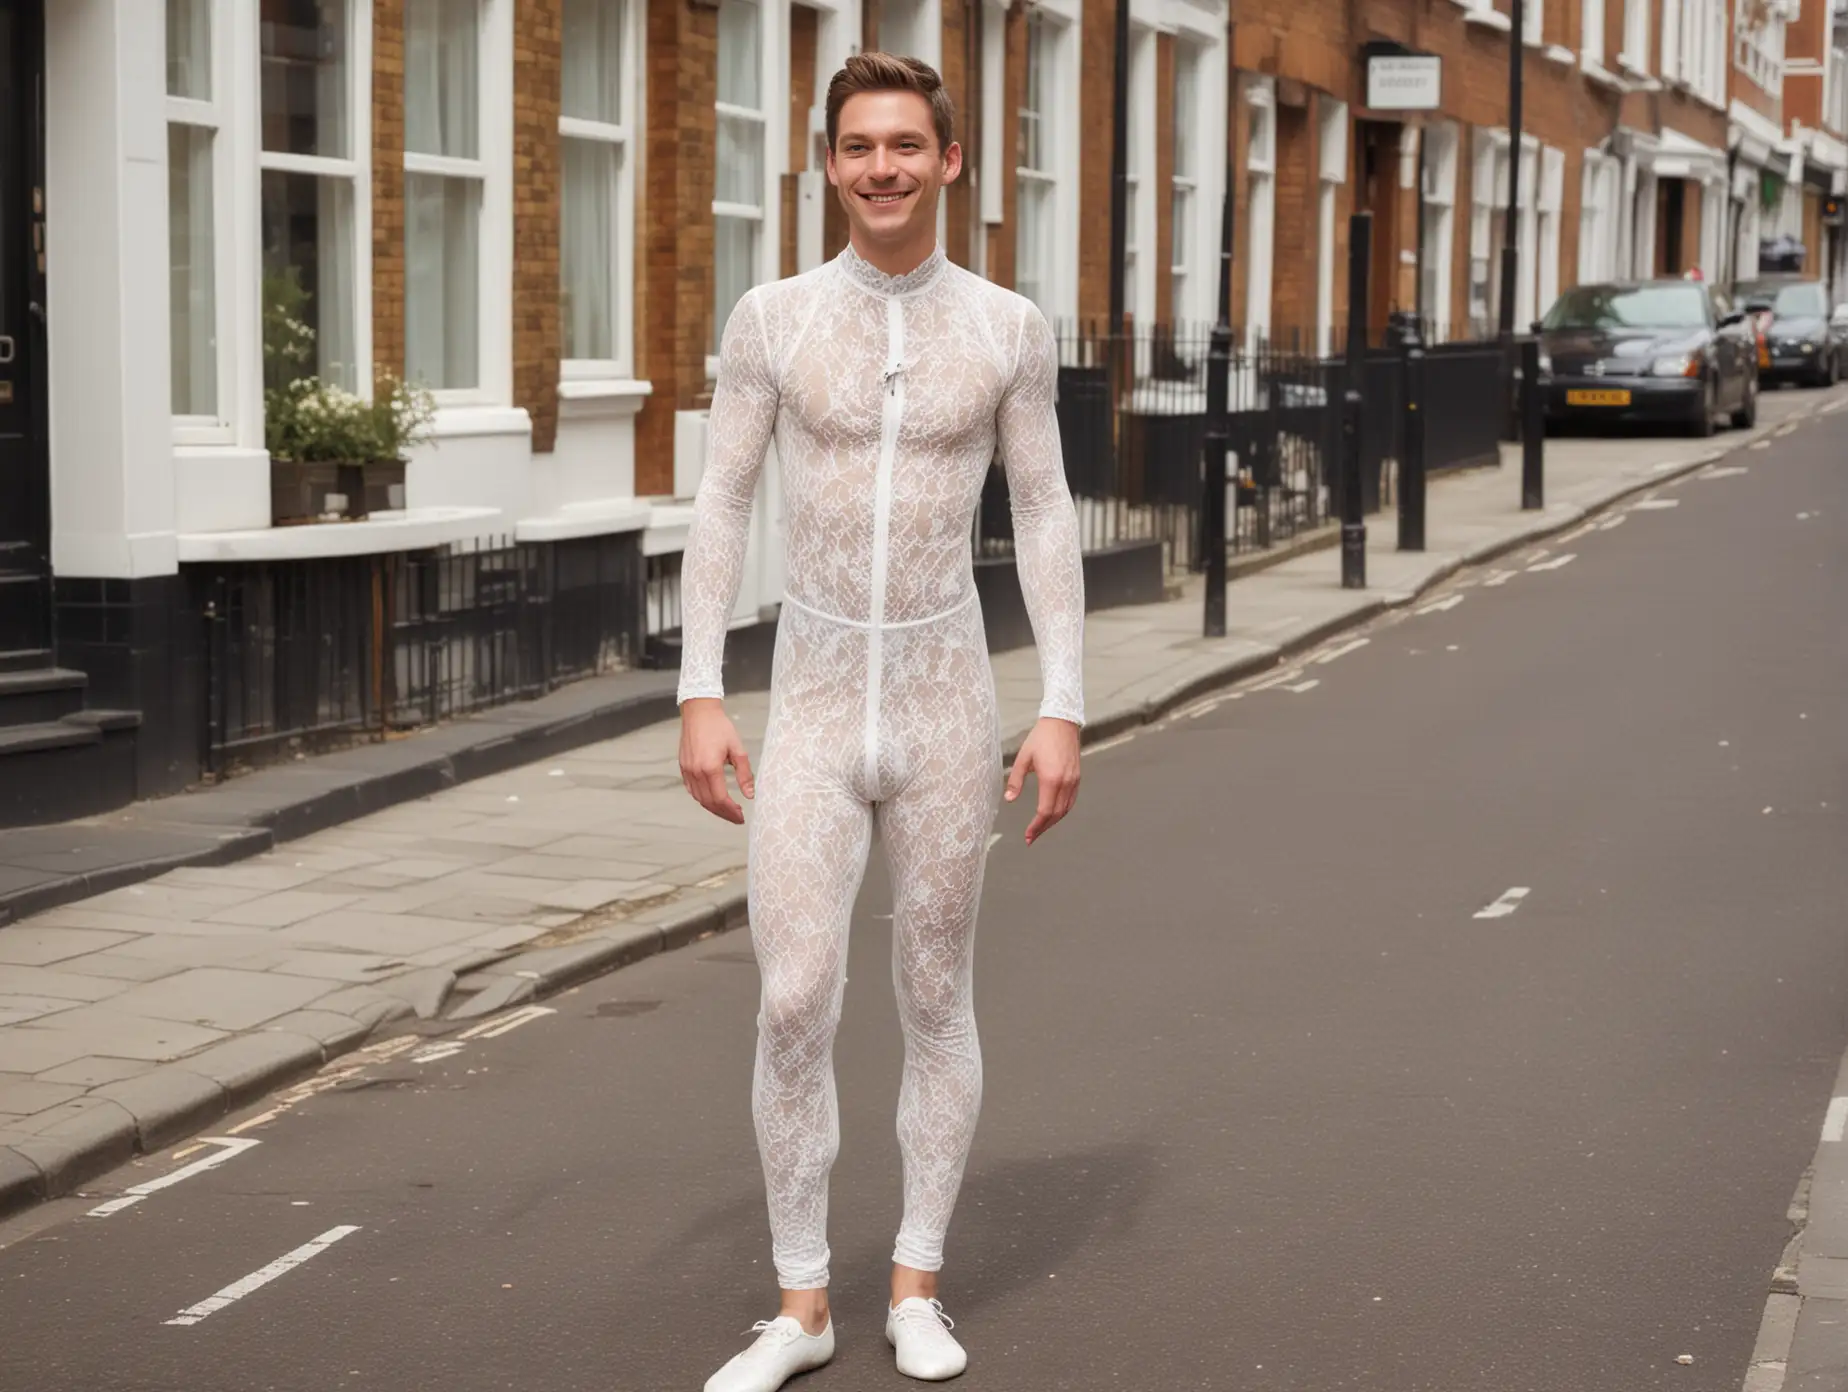 Young-Man-in-White-Lace-Catsuit-and-Ballet-Shoes-Smiling-in-London-Street